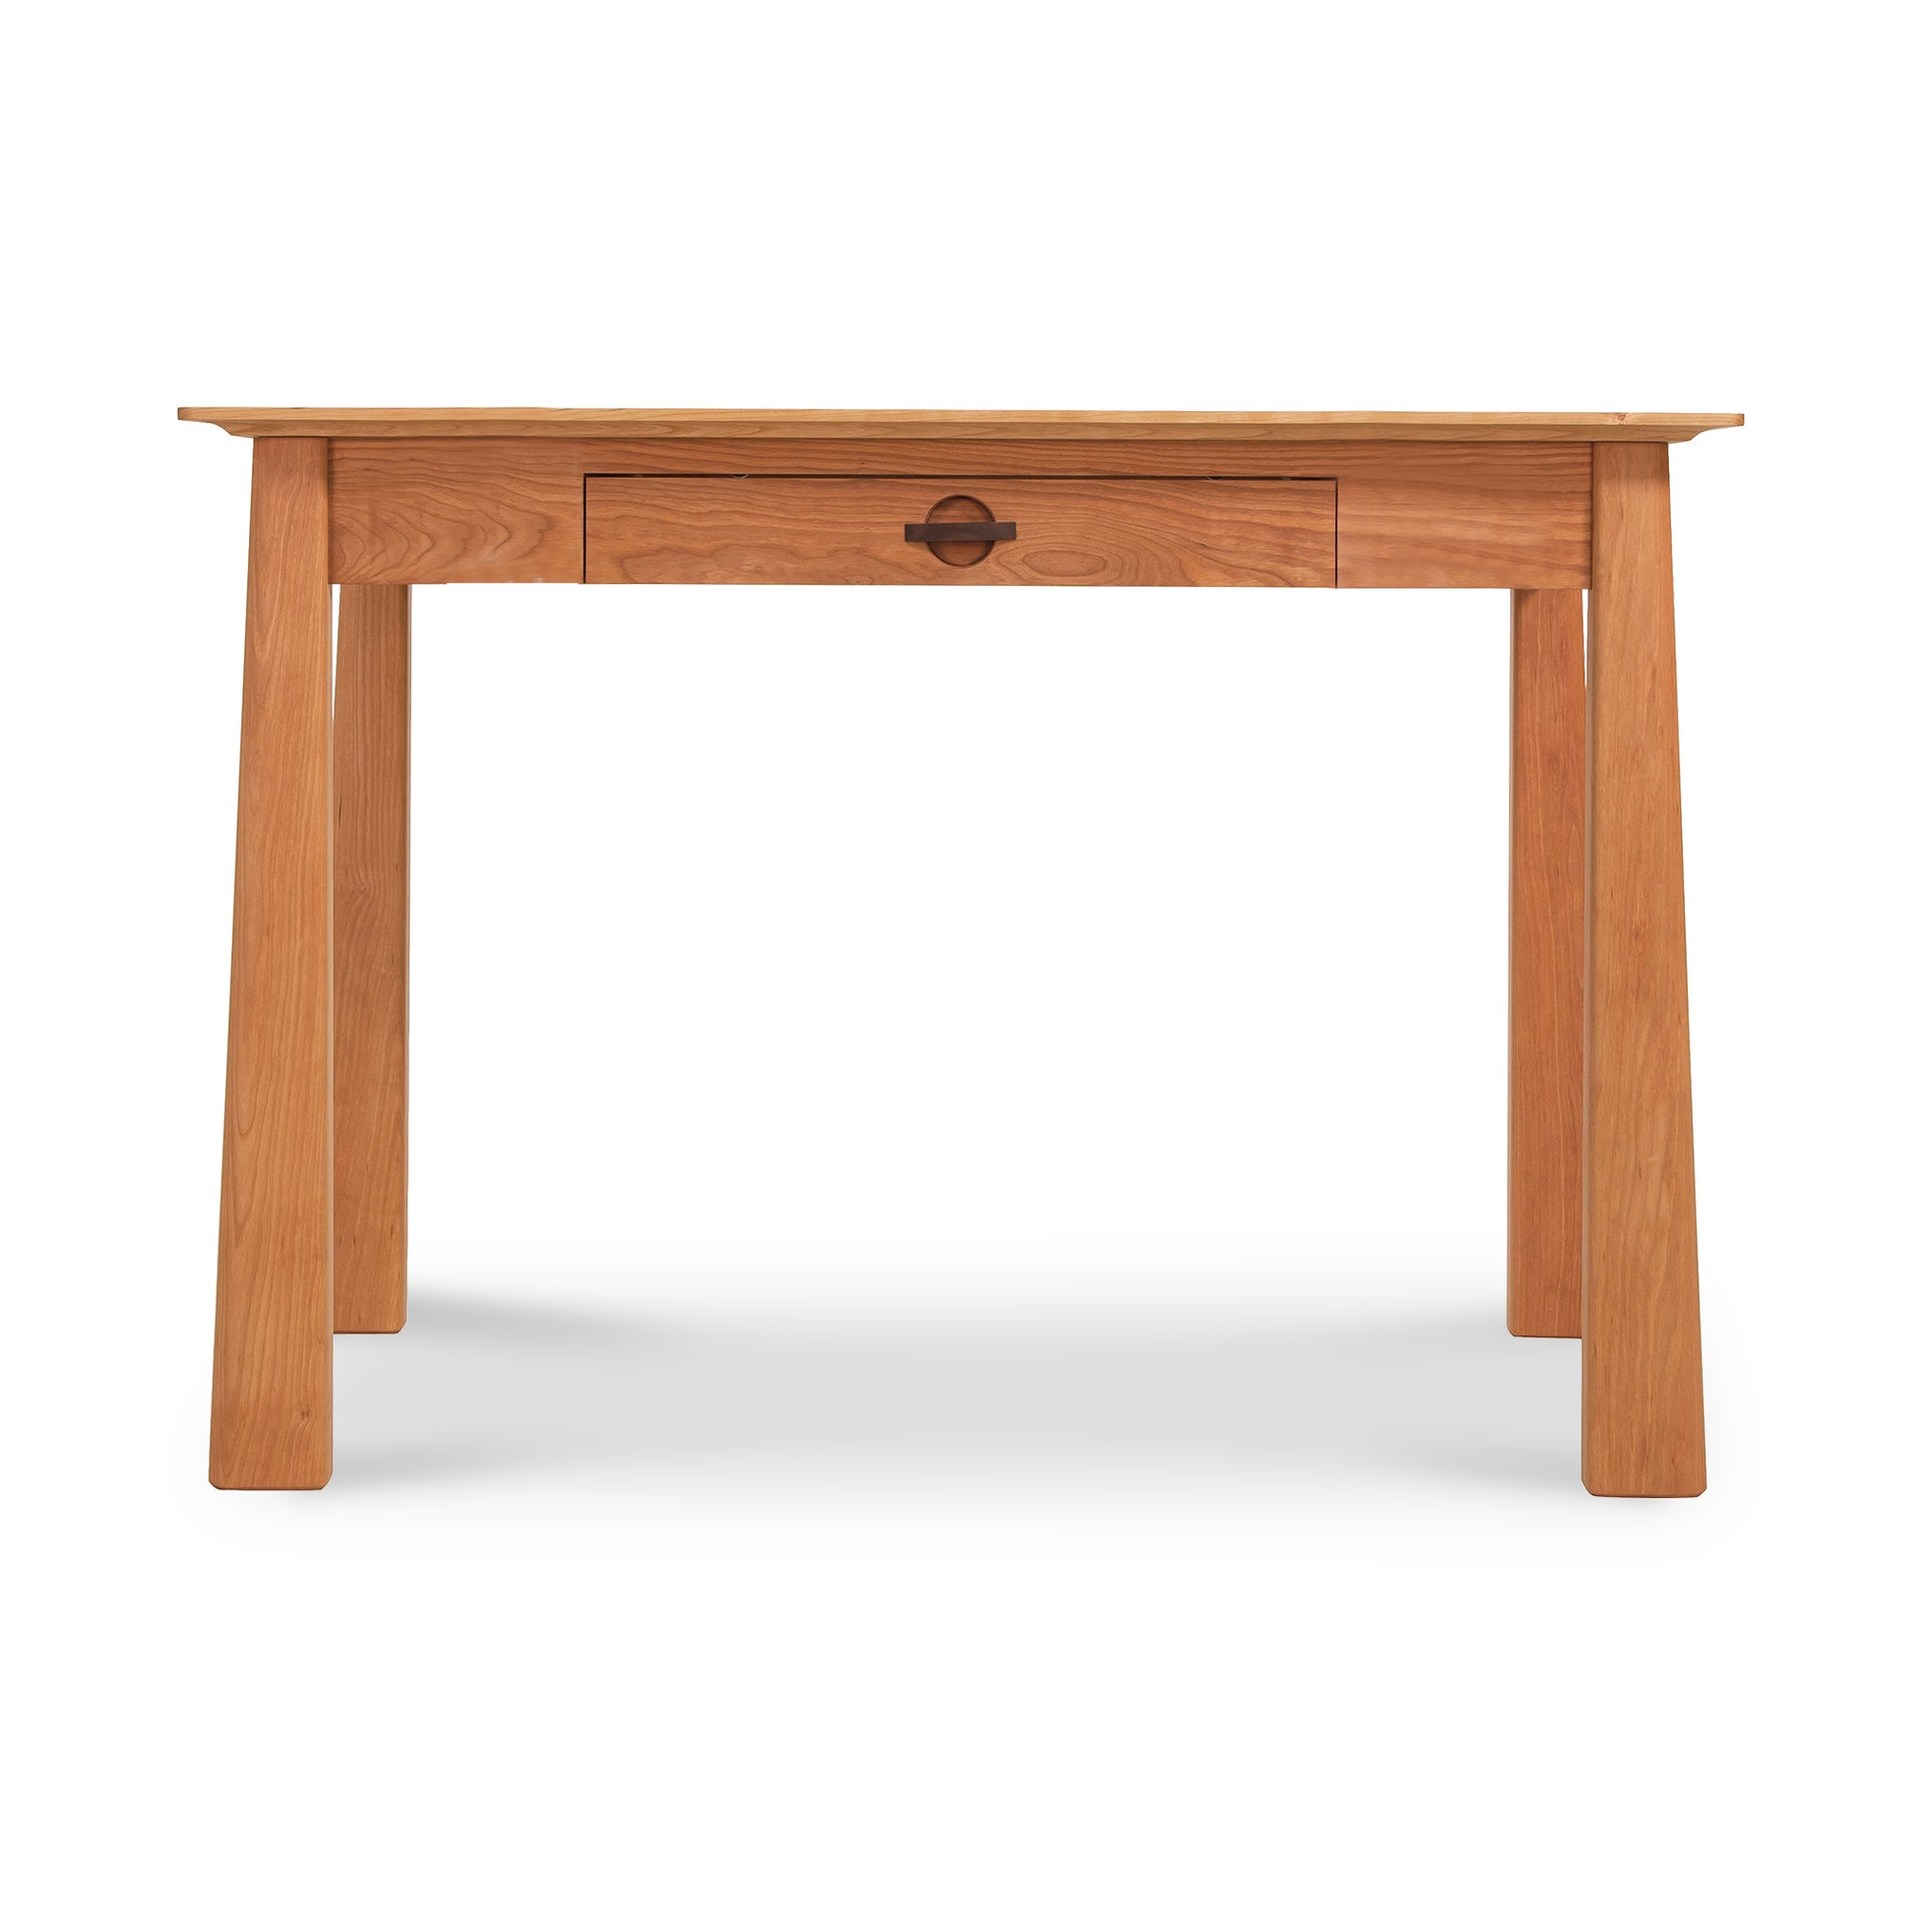 An eco-friendly Cherry Moon Writing Desk by Maple Corner Woodworks with a drawer on top.